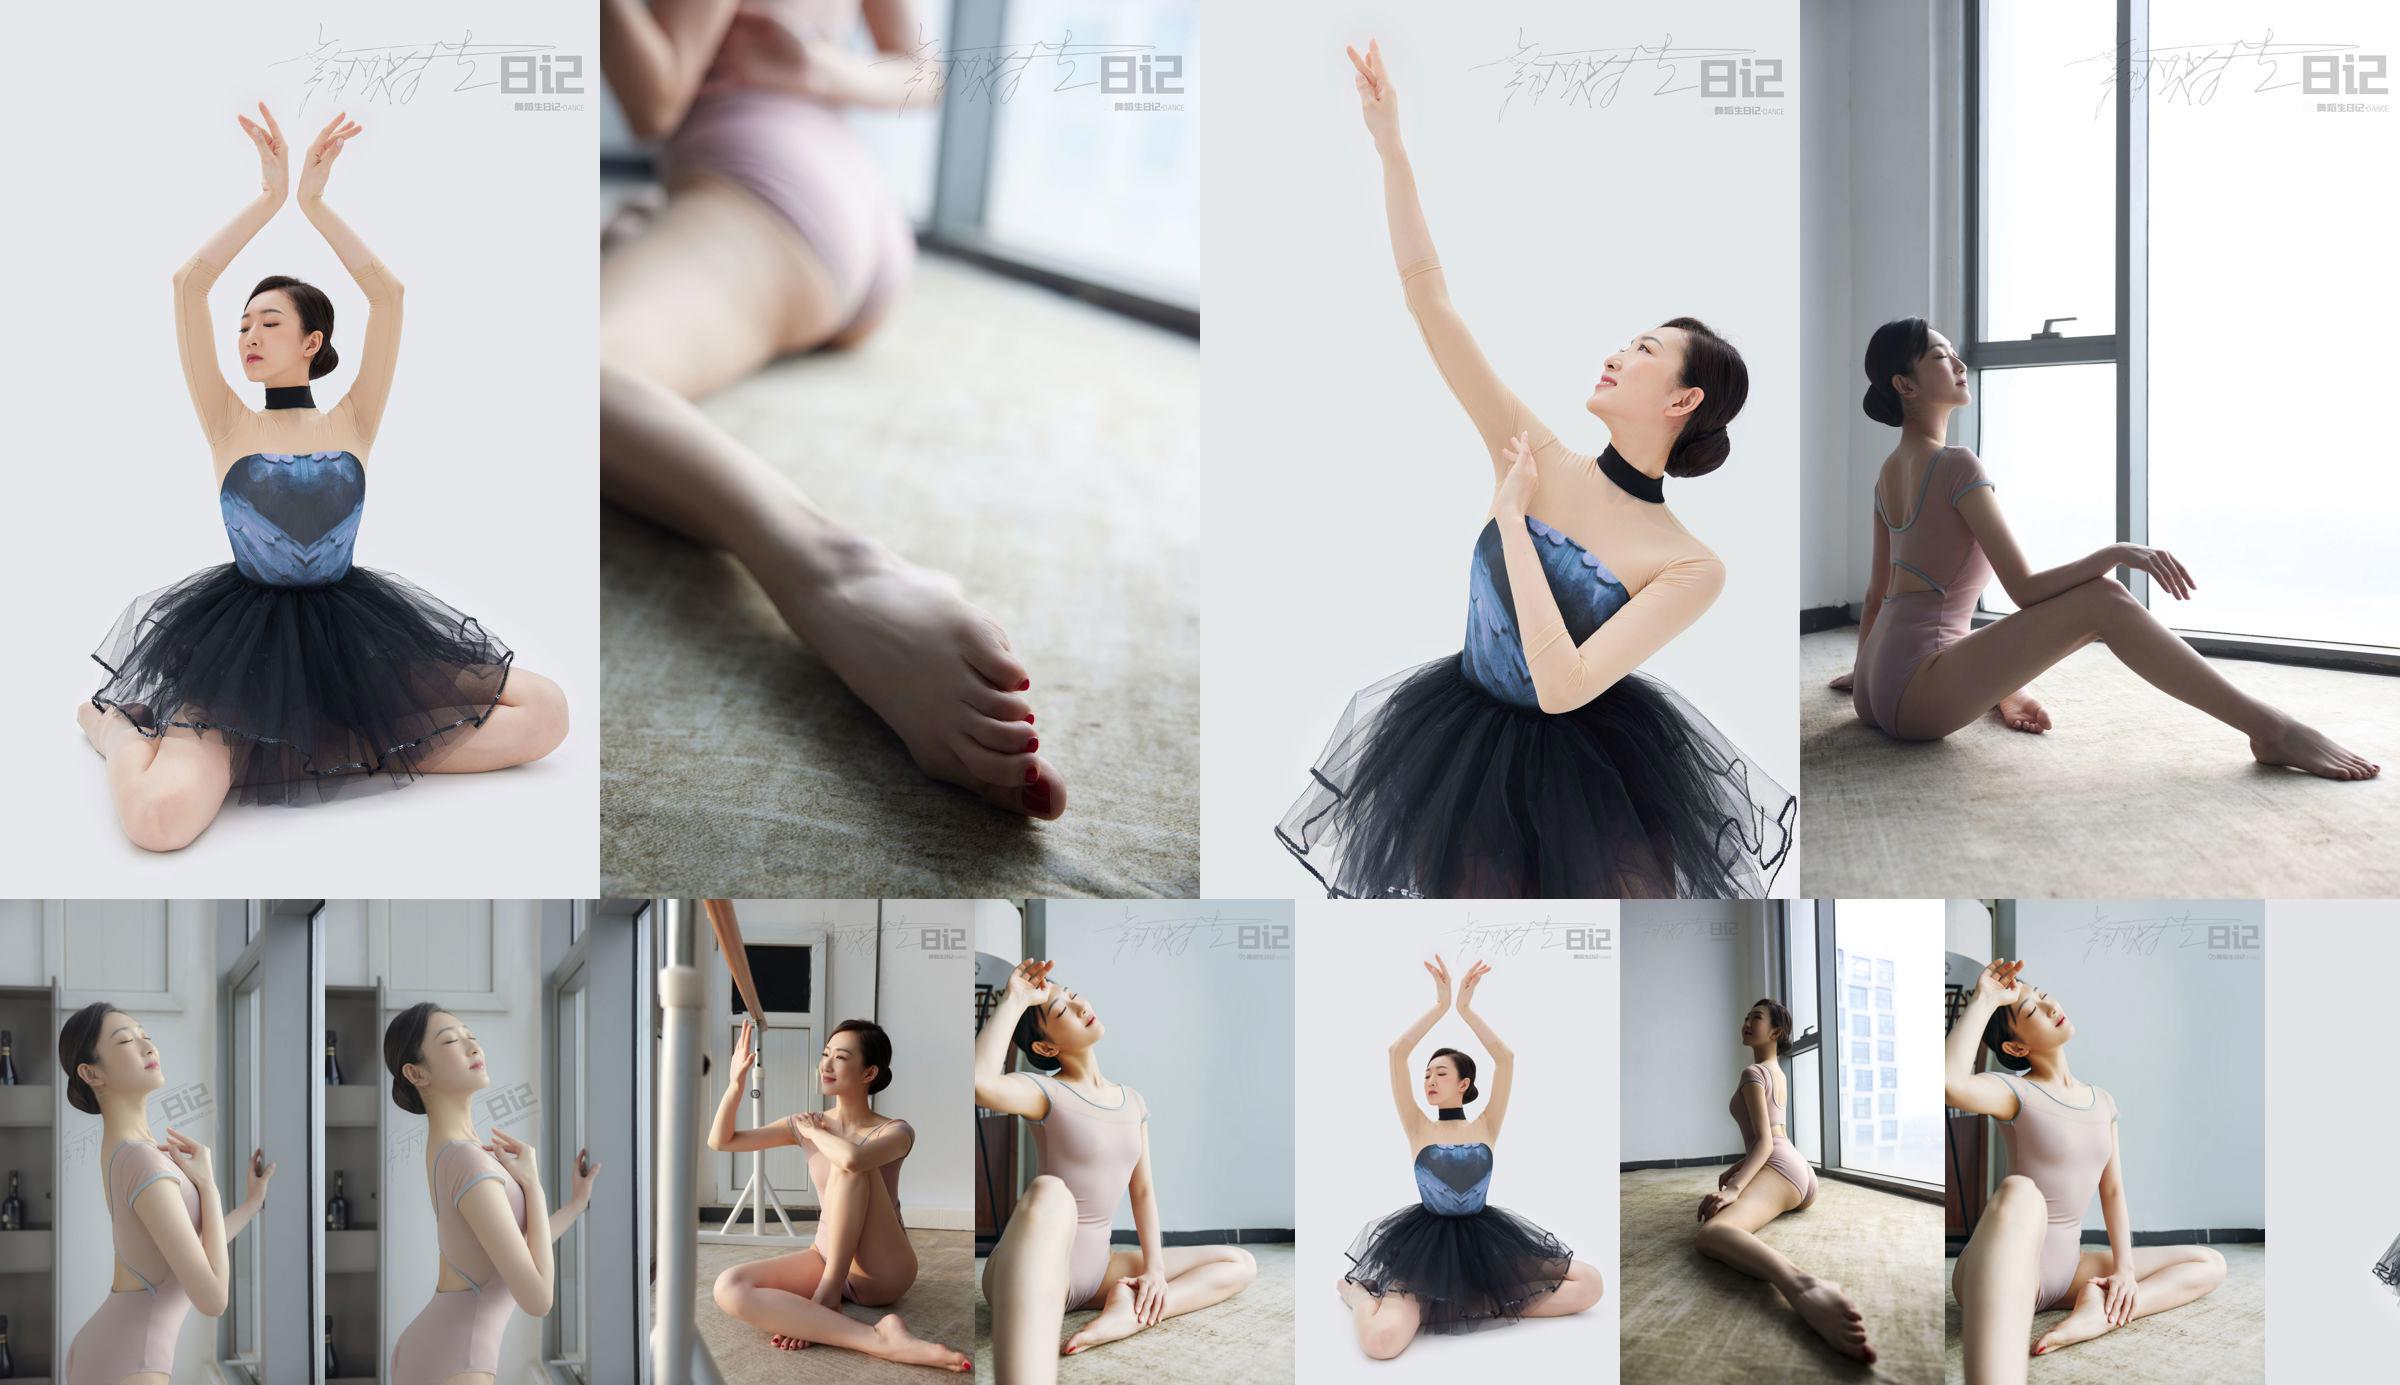 [GALLI Jiali] Diary of a Dance Student 059 Dong Dong No.4ccaf0 หน้า 1